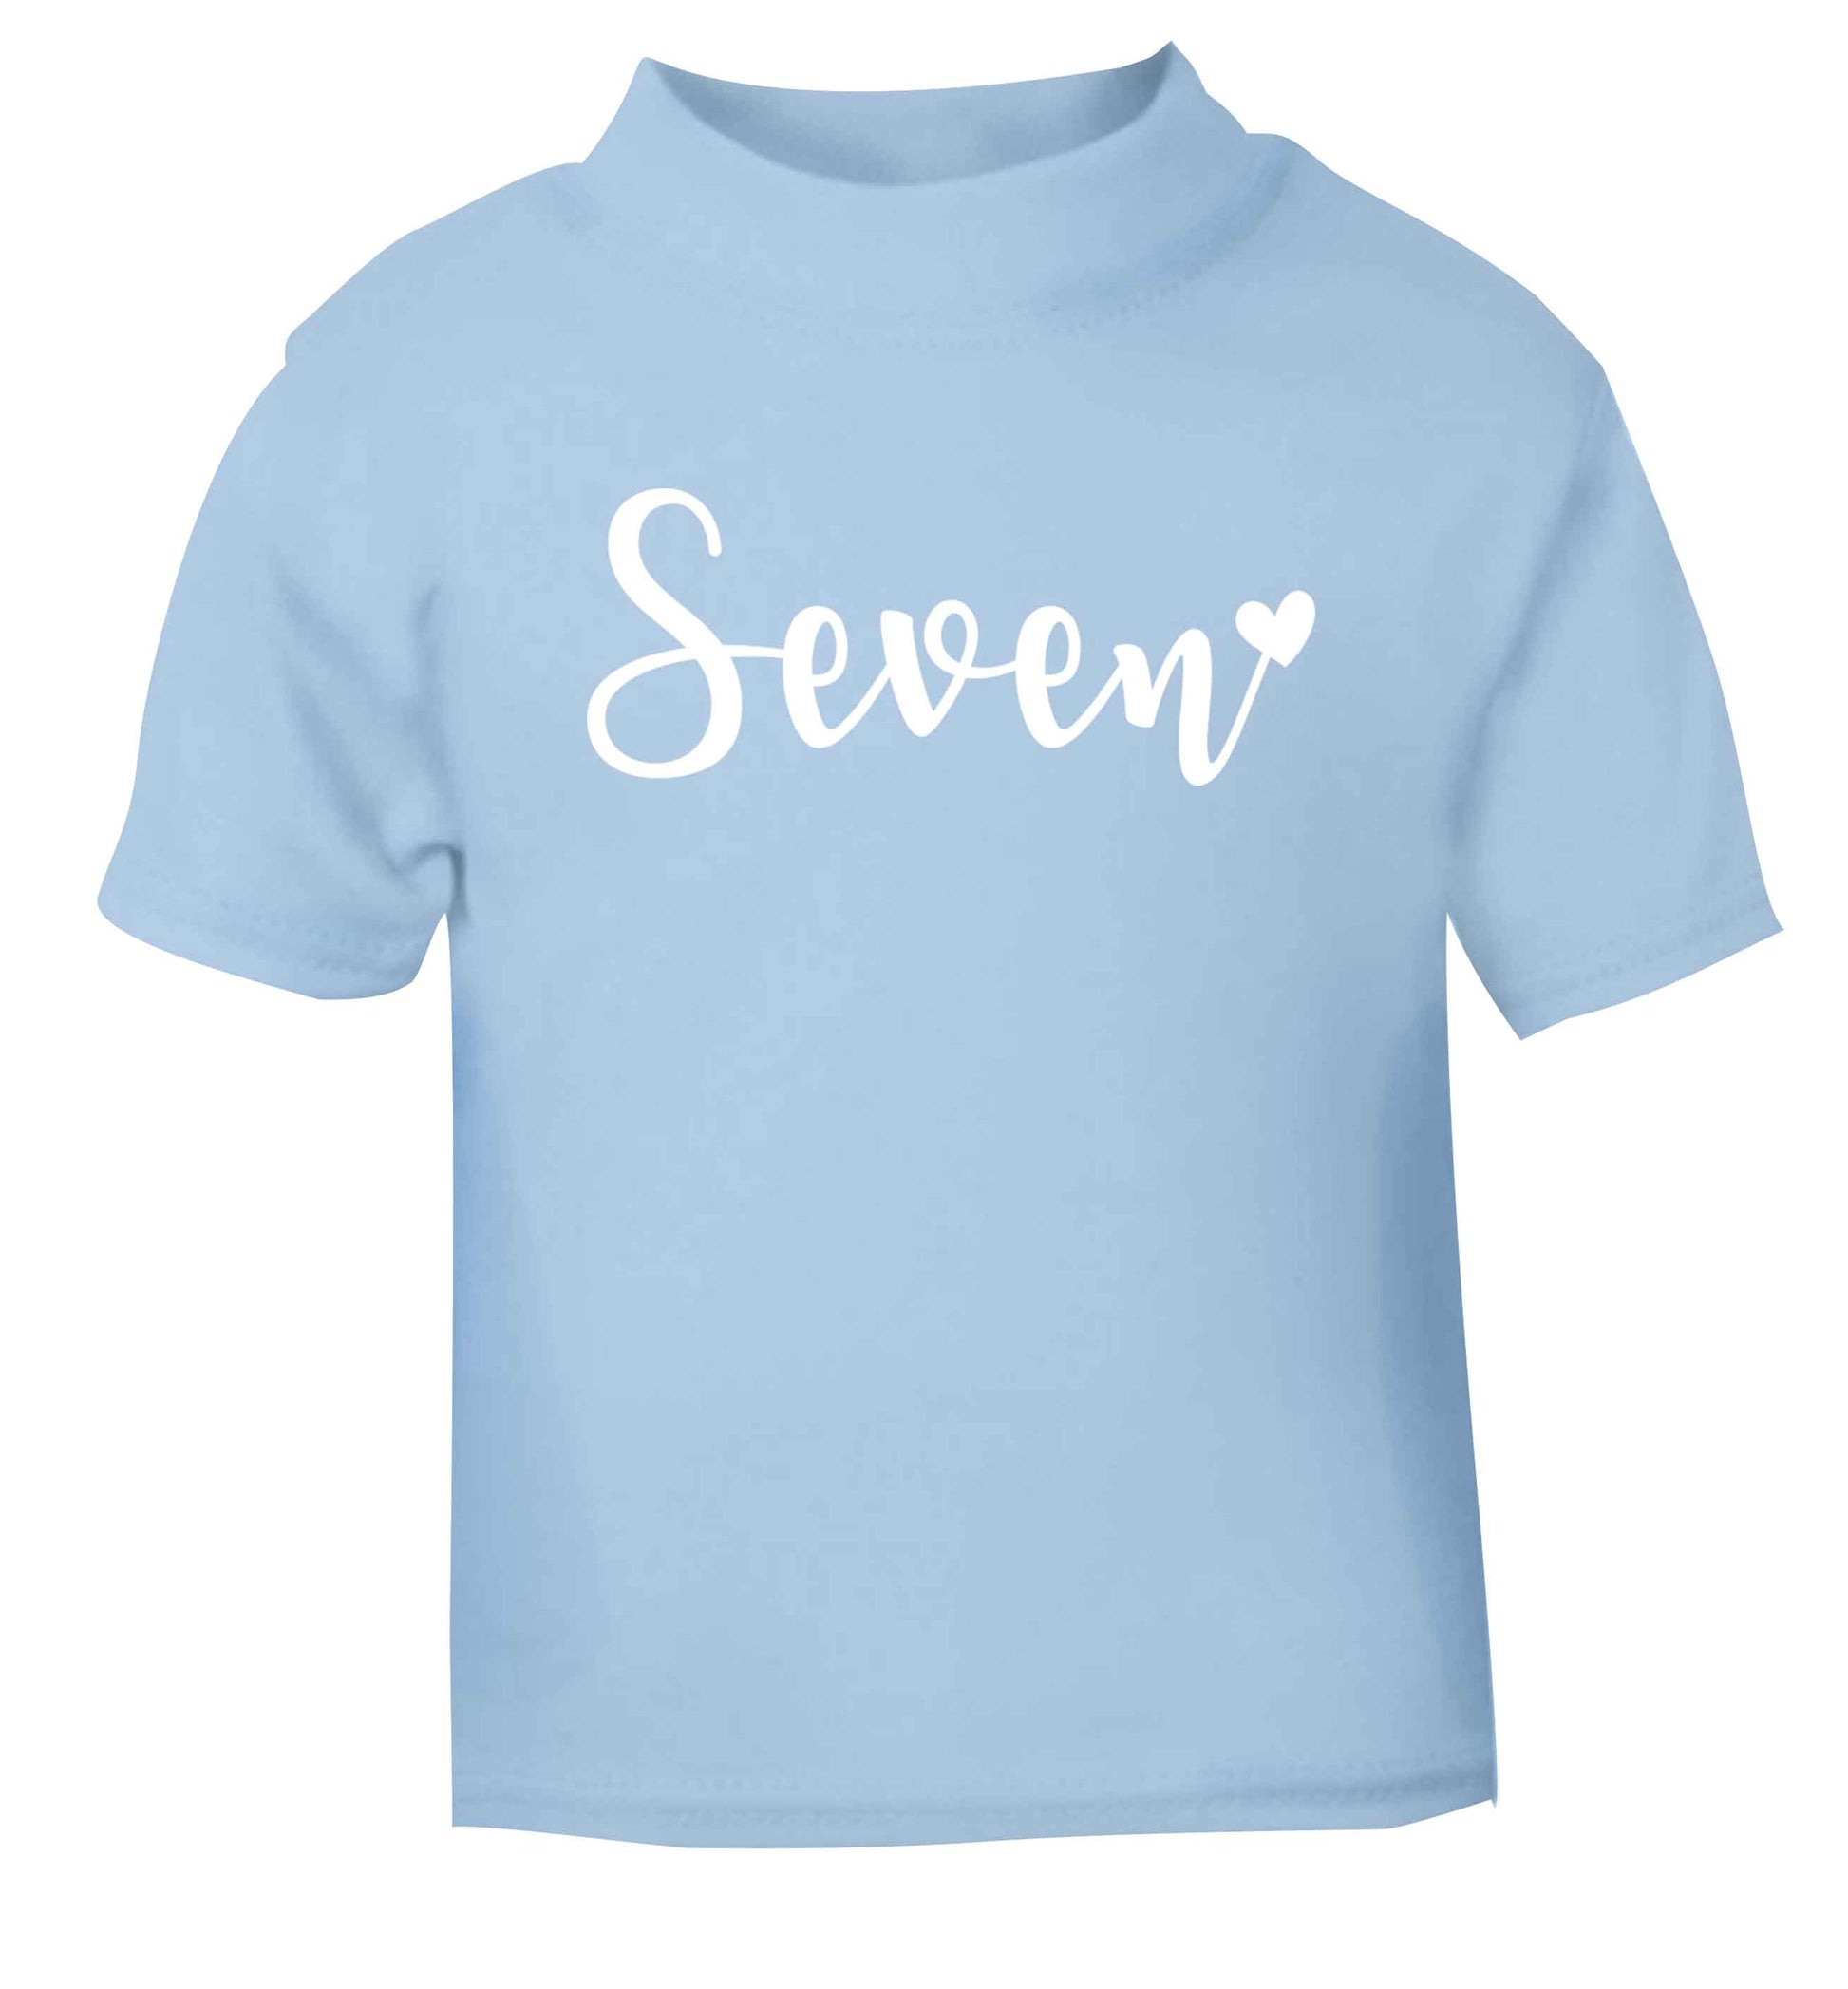 Seven and heart light blue baby toddler Tshirt 2 Years